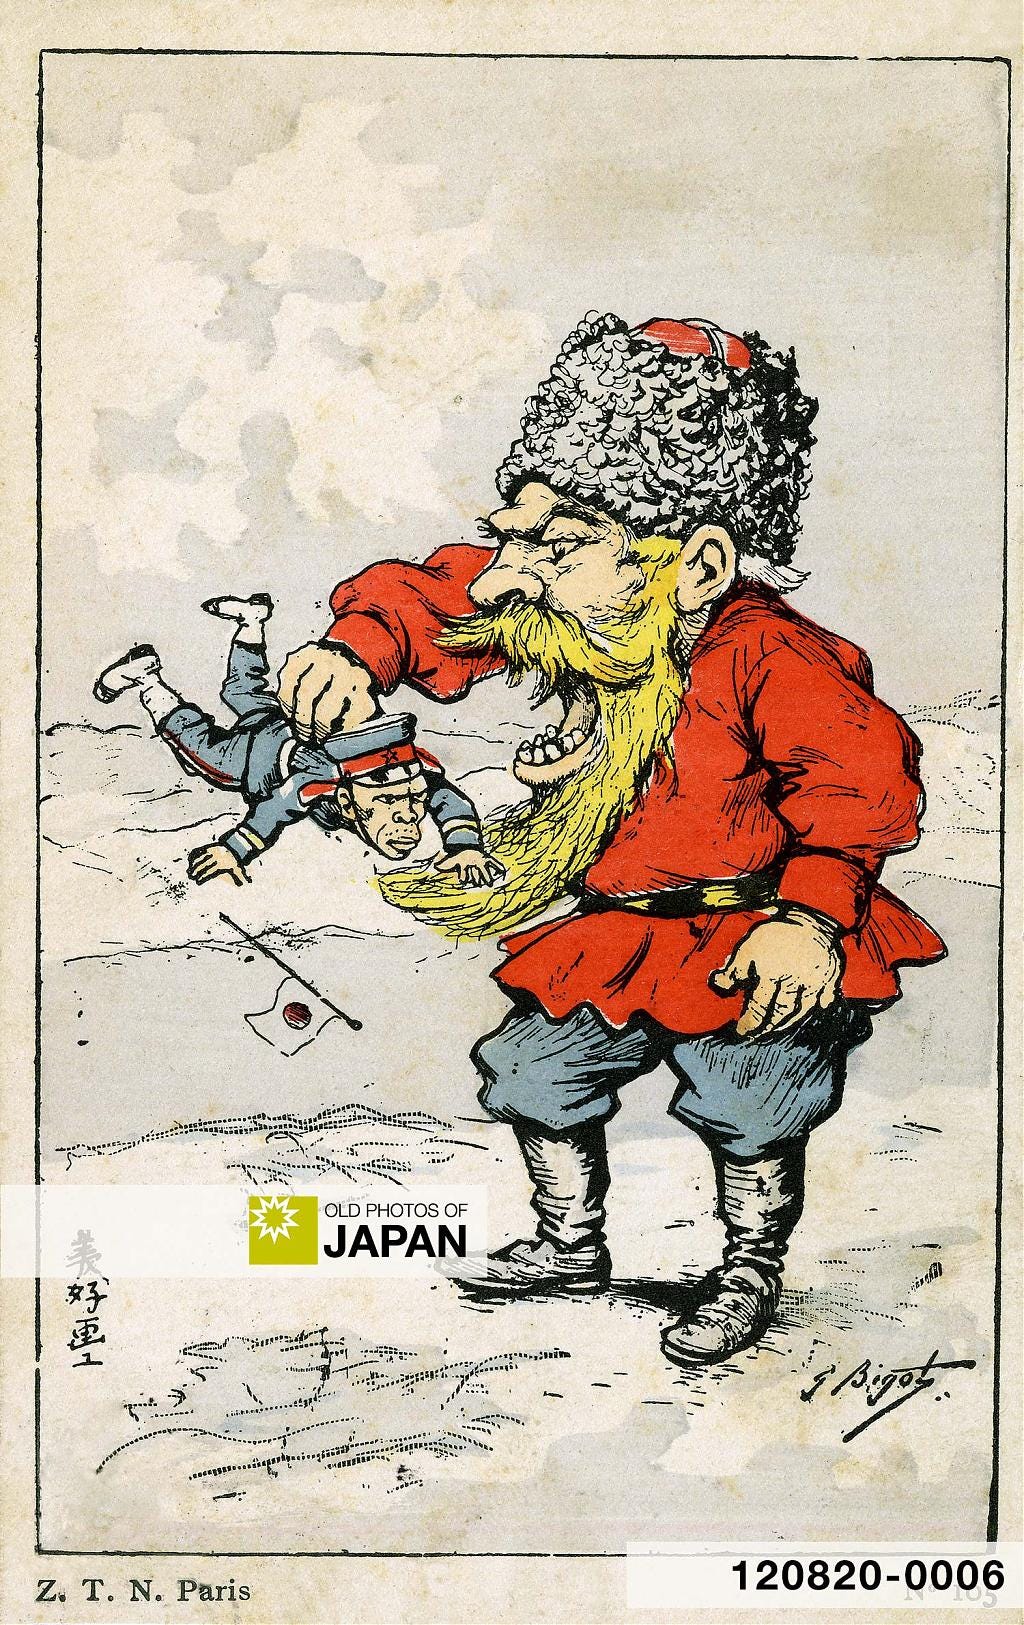 Satirical illustration from the Russo-Japanese War (1904-1908)